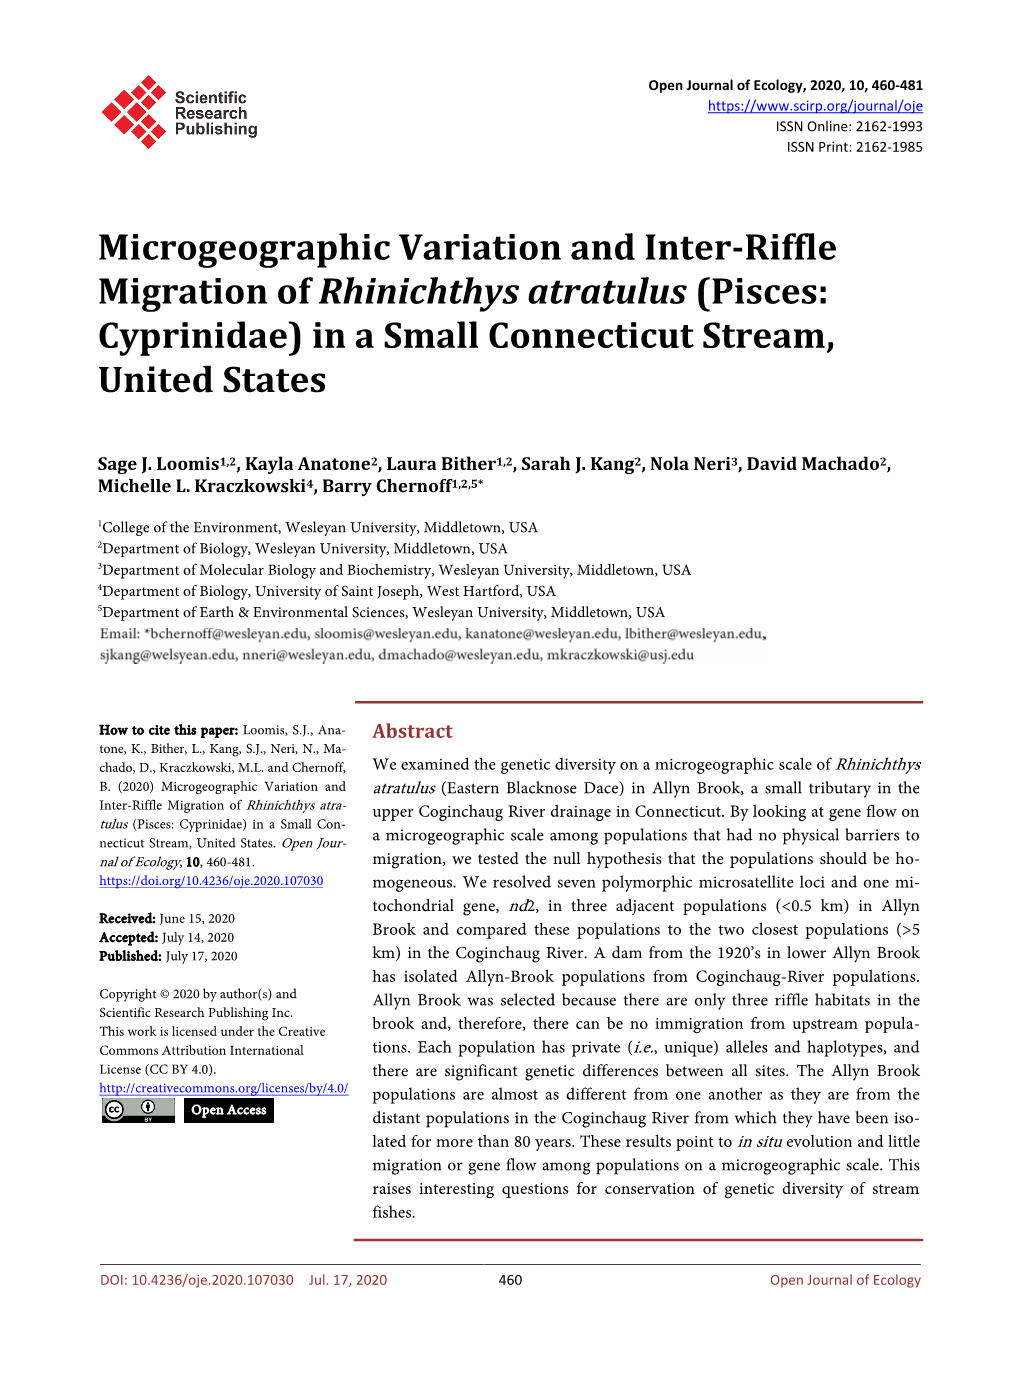 Microgeographic Variation and Inter-Riffle Migration of Rhinichthys Atratulus (Pisces: Cyprinidae) in a Small Connecticut Stream, United States